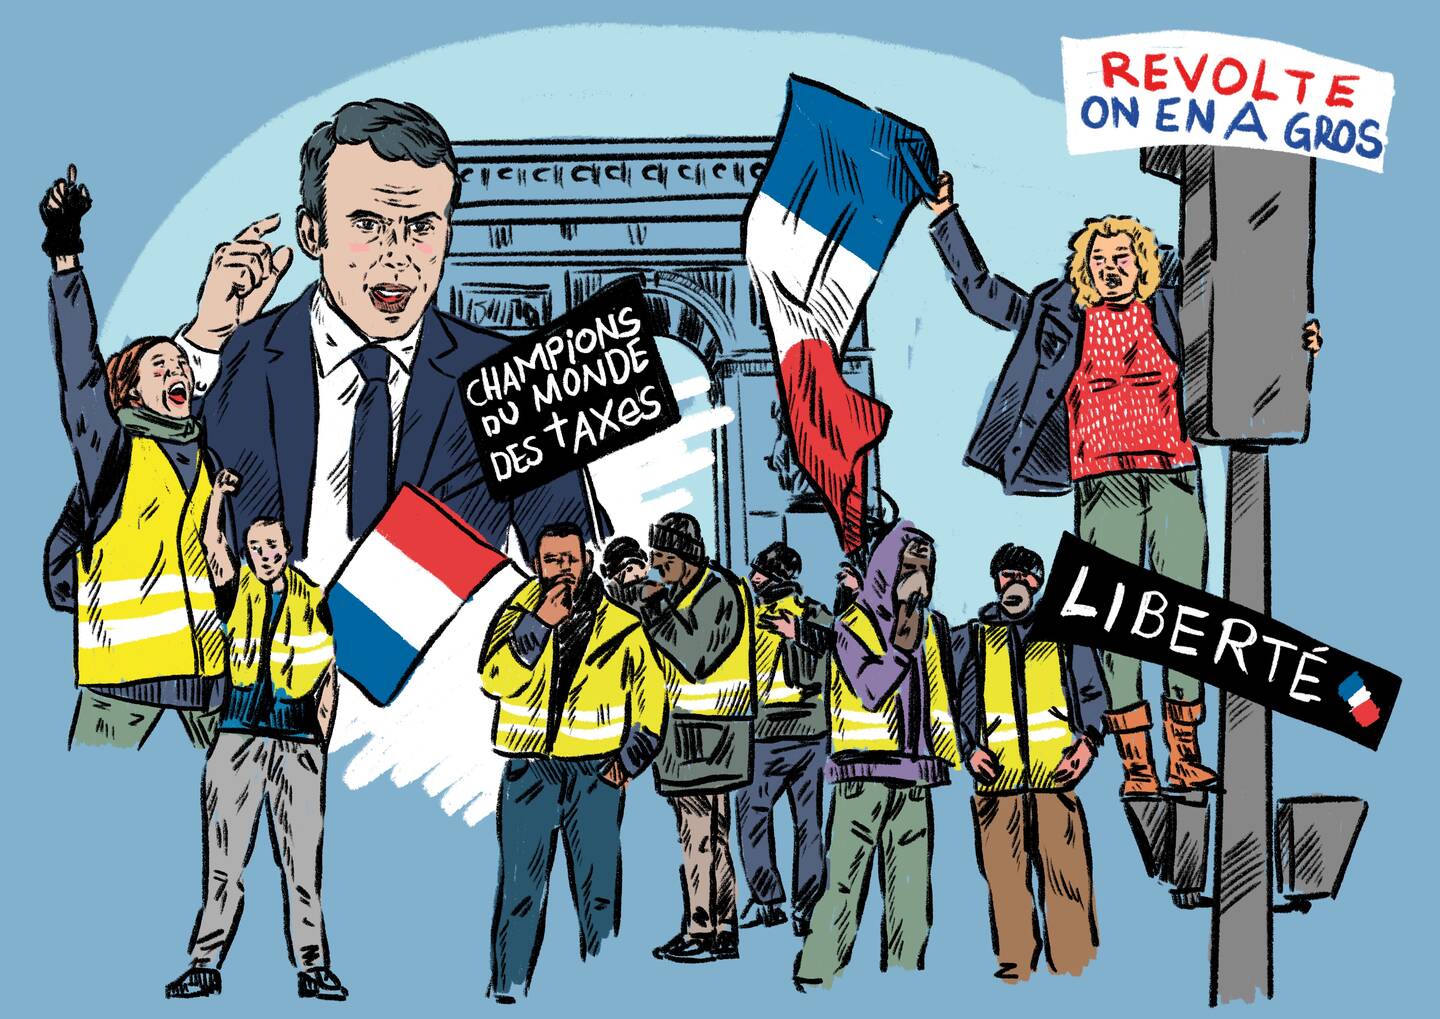 France: Trade unions, social movements and the yellow vests